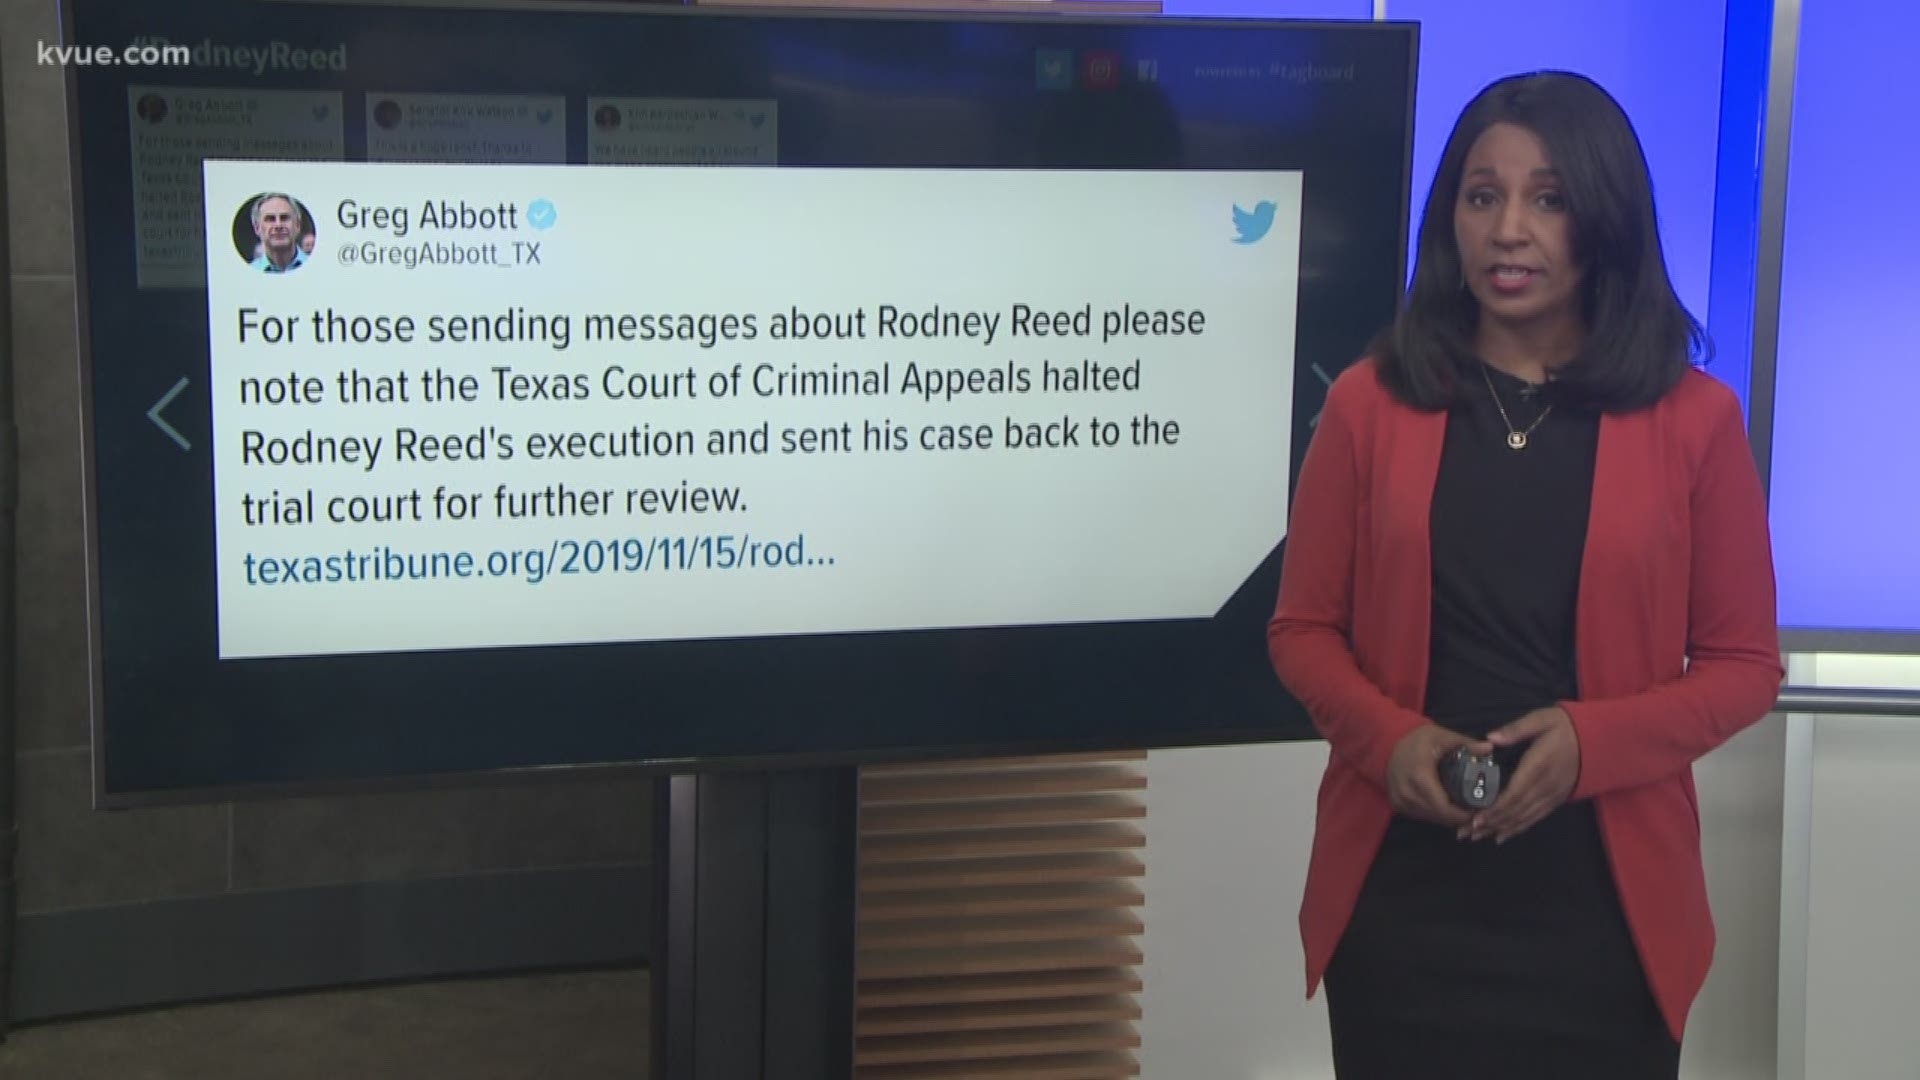 The Texas governor stayed quiet, only tweeting on Friday that the decision is going back to the trial court for review.